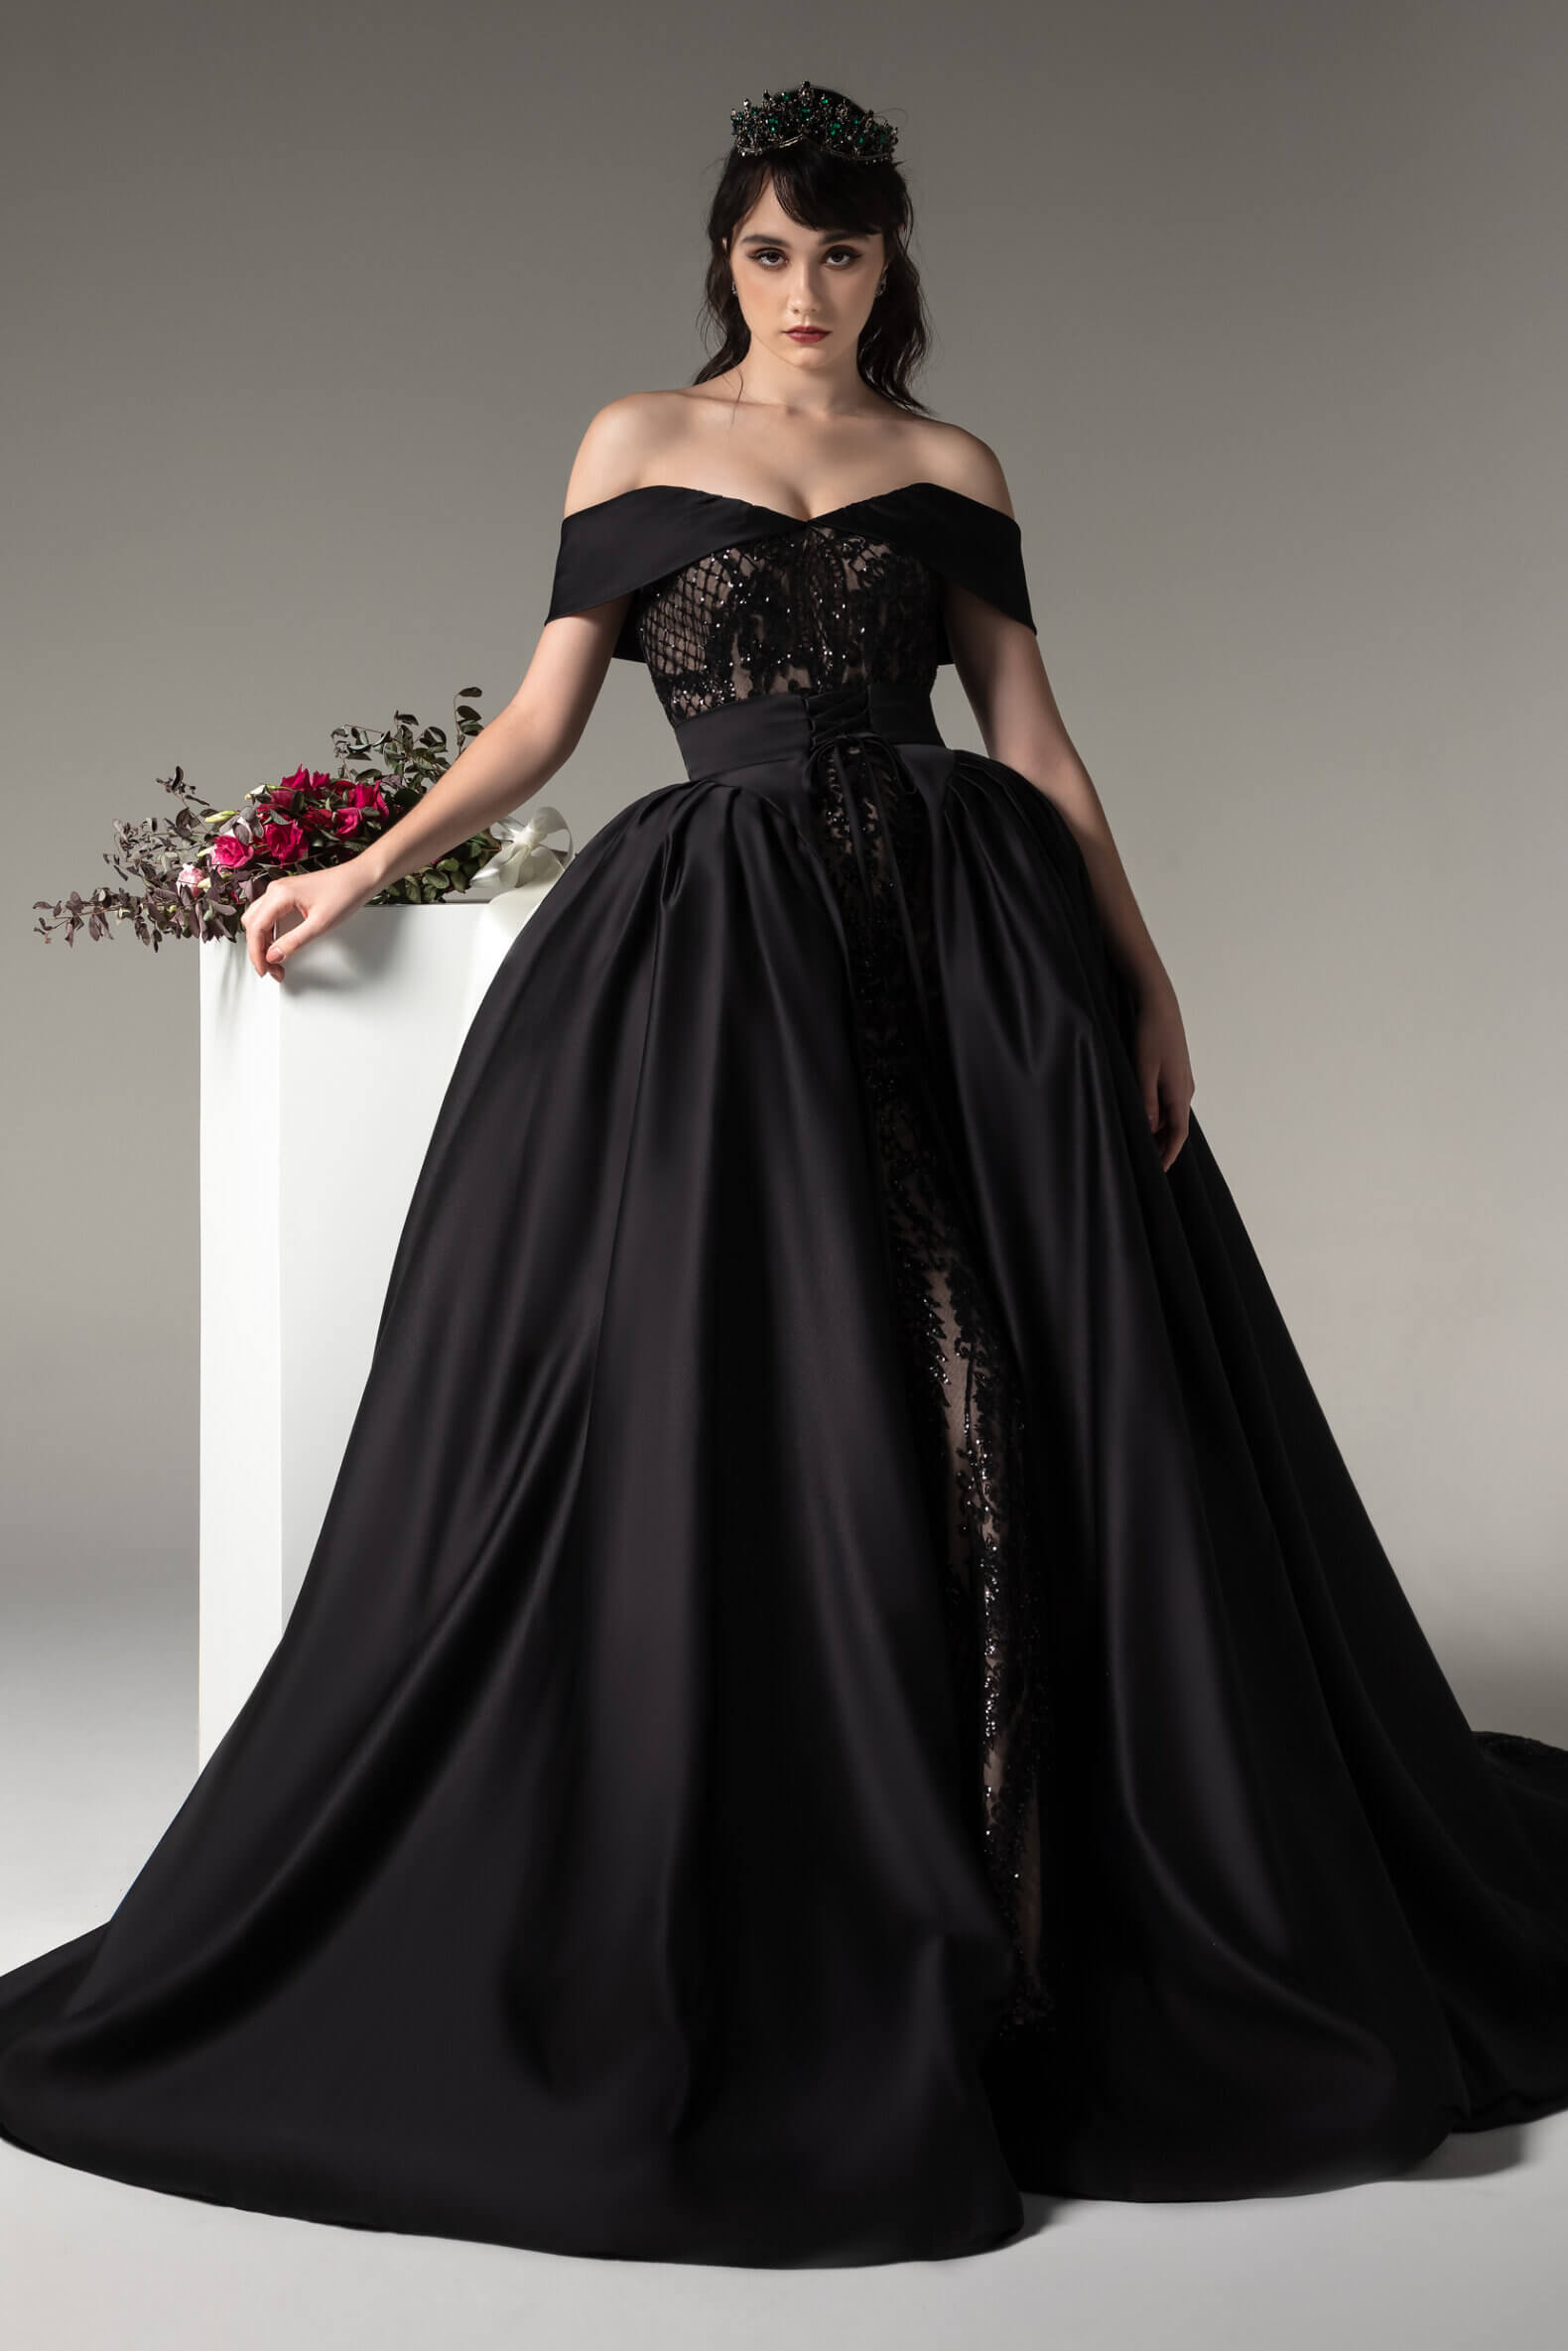 Cocomelody Black Wedding Dress List | Cocomelody Mag